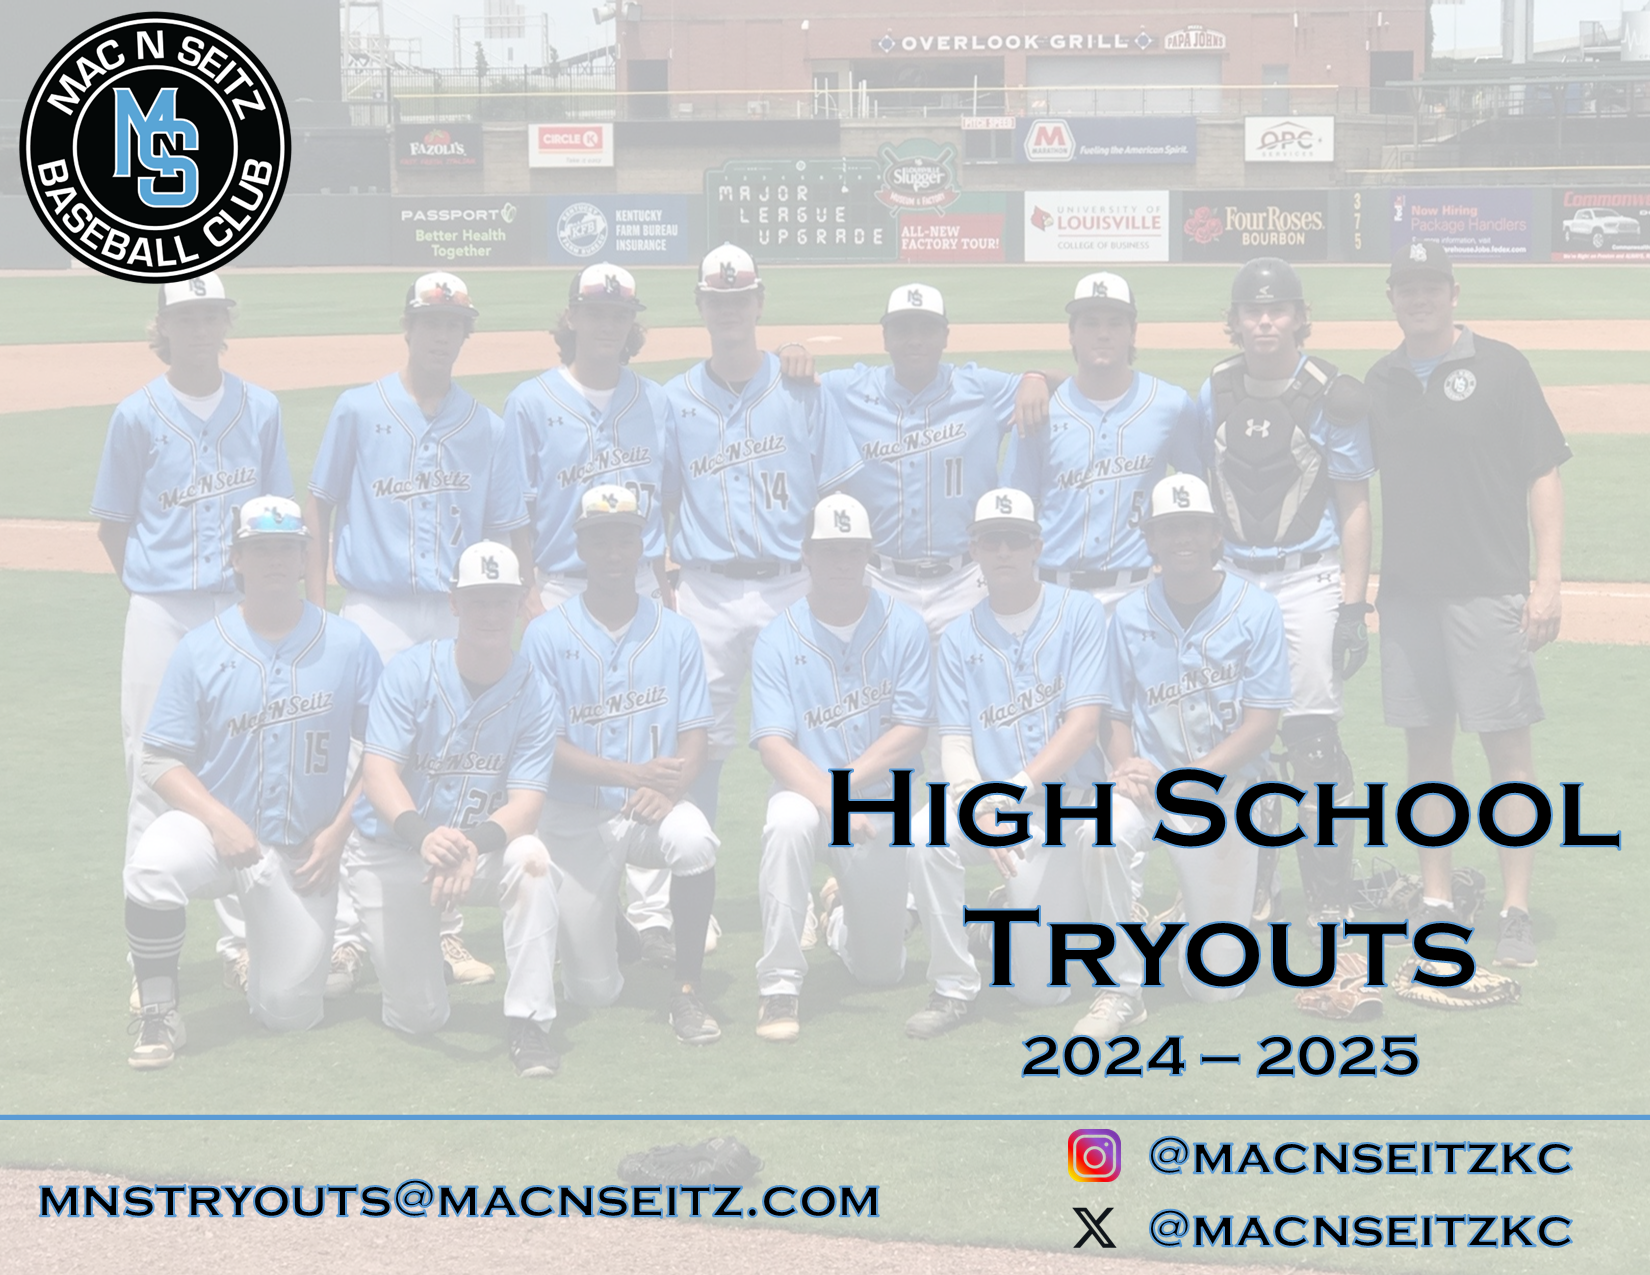 MNS_High School Tryouts_2024-2025_Pic